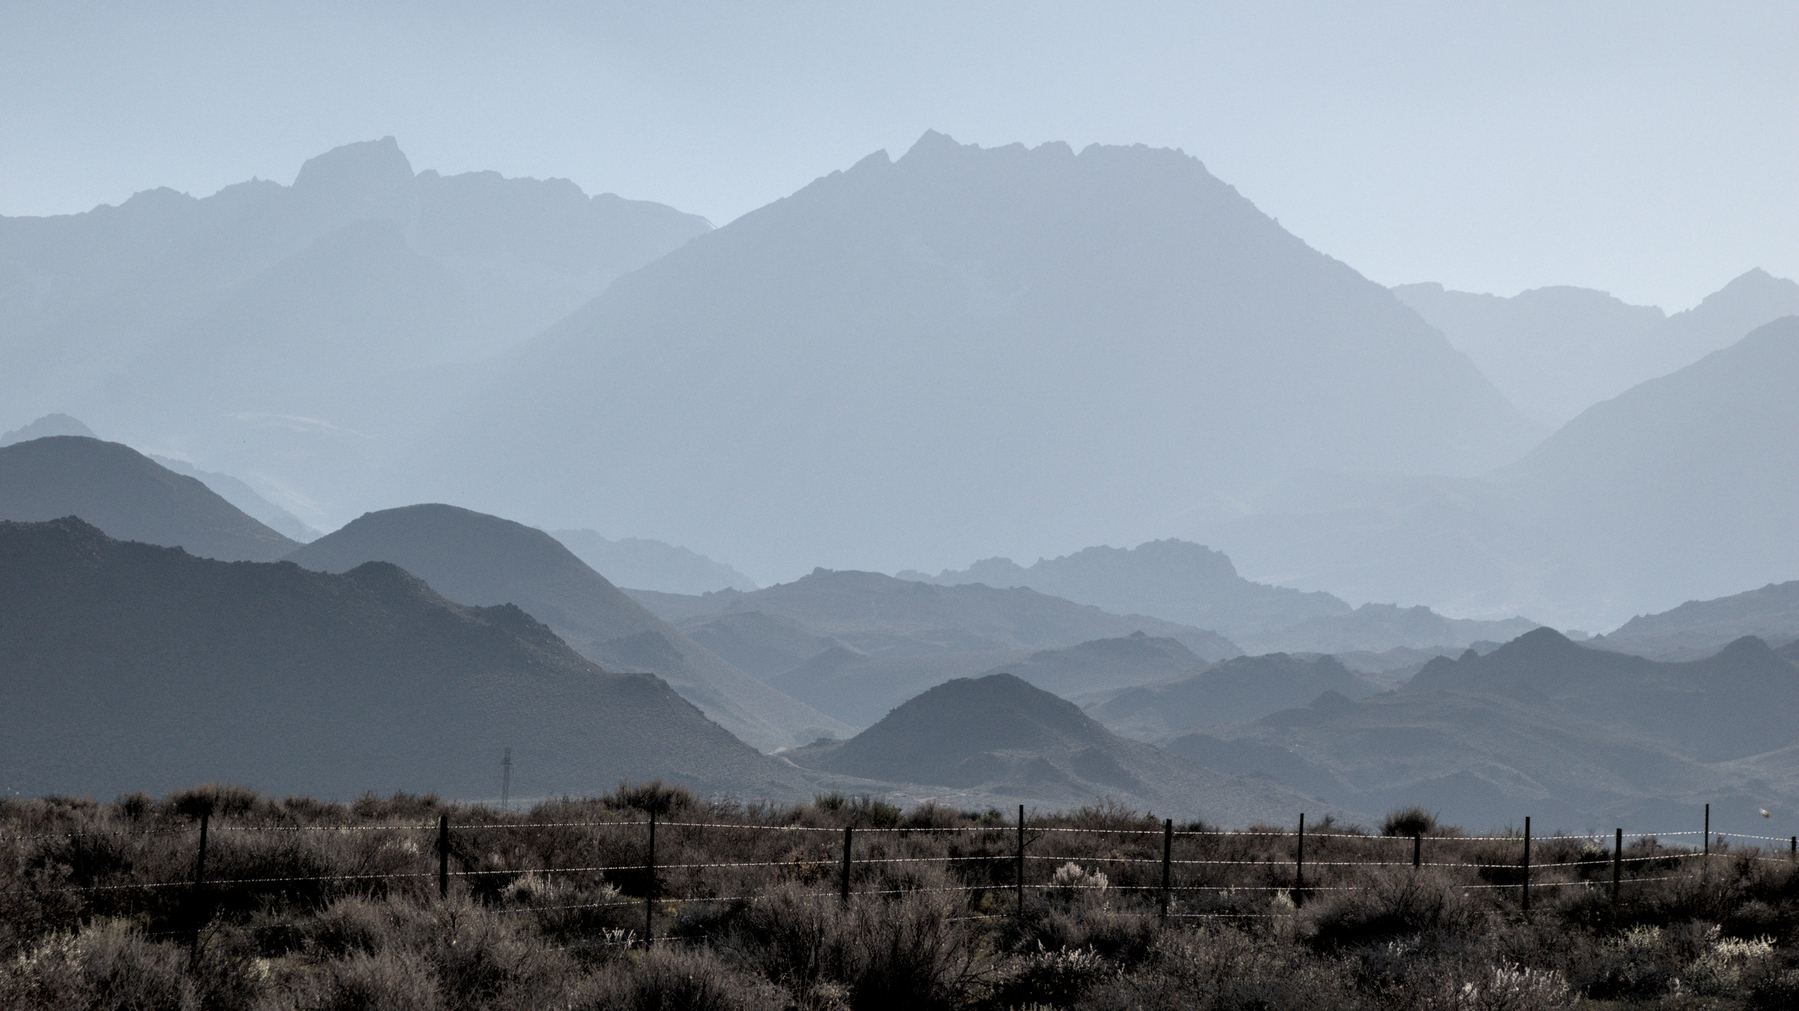 A barbed-wire fence runs along the edge of high-desert scrub, receding to rocky foothills of the Eastern Sierra.  Haze obscures the details of the hills.  The closest, lowest hills are dark grey; the highest are light grey and barely distinguishable from the faded blue sky.